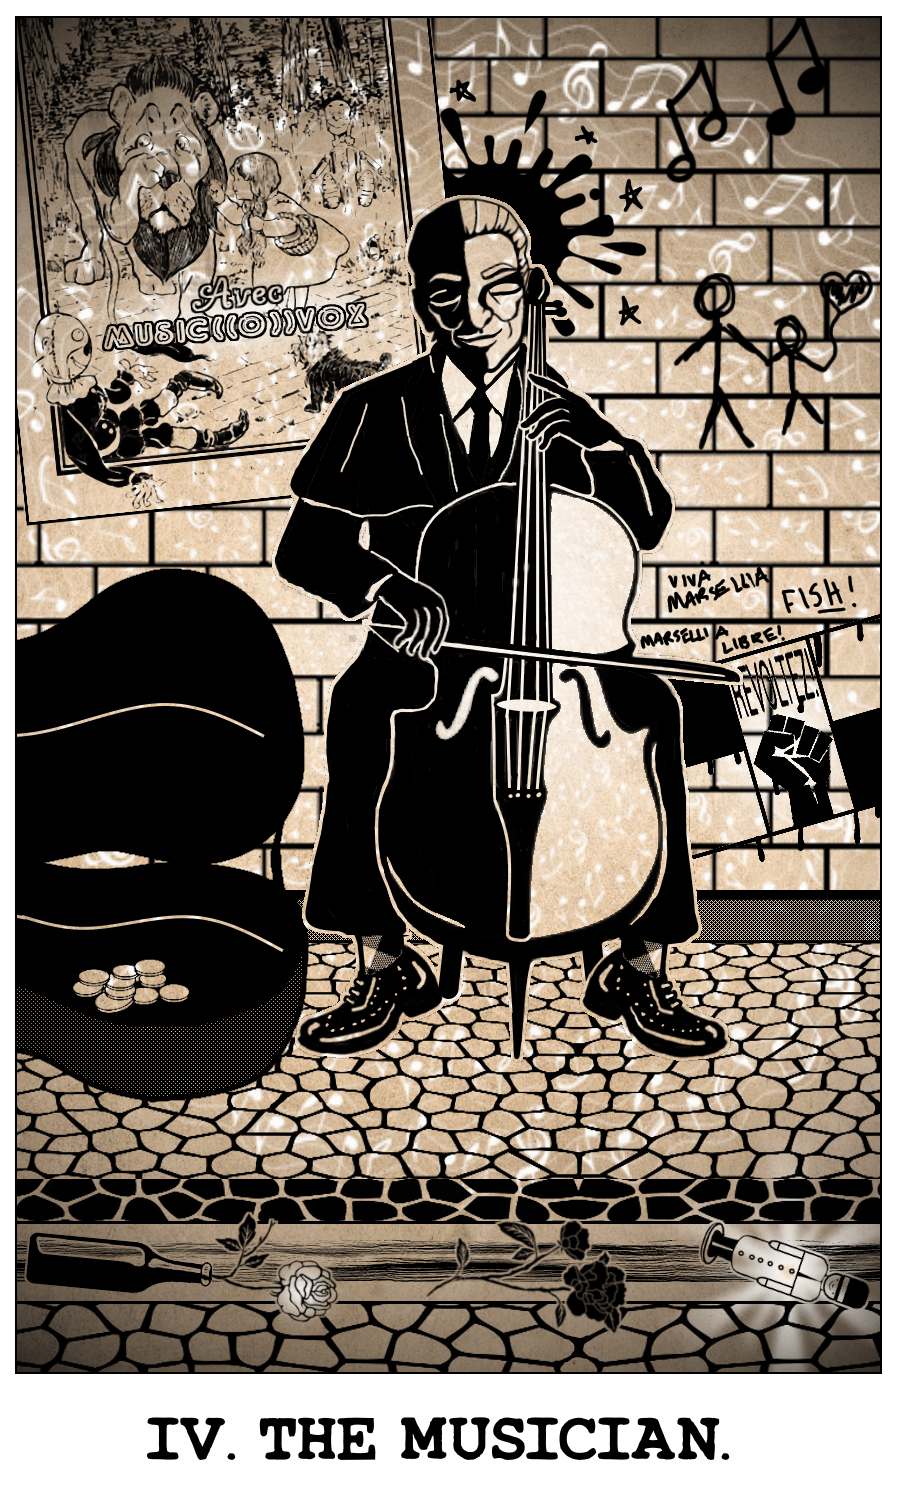 Mordecai's tarot card, The Musician, based on The Emperor. He is playing 'cello on a street corner, with his eyes closed.